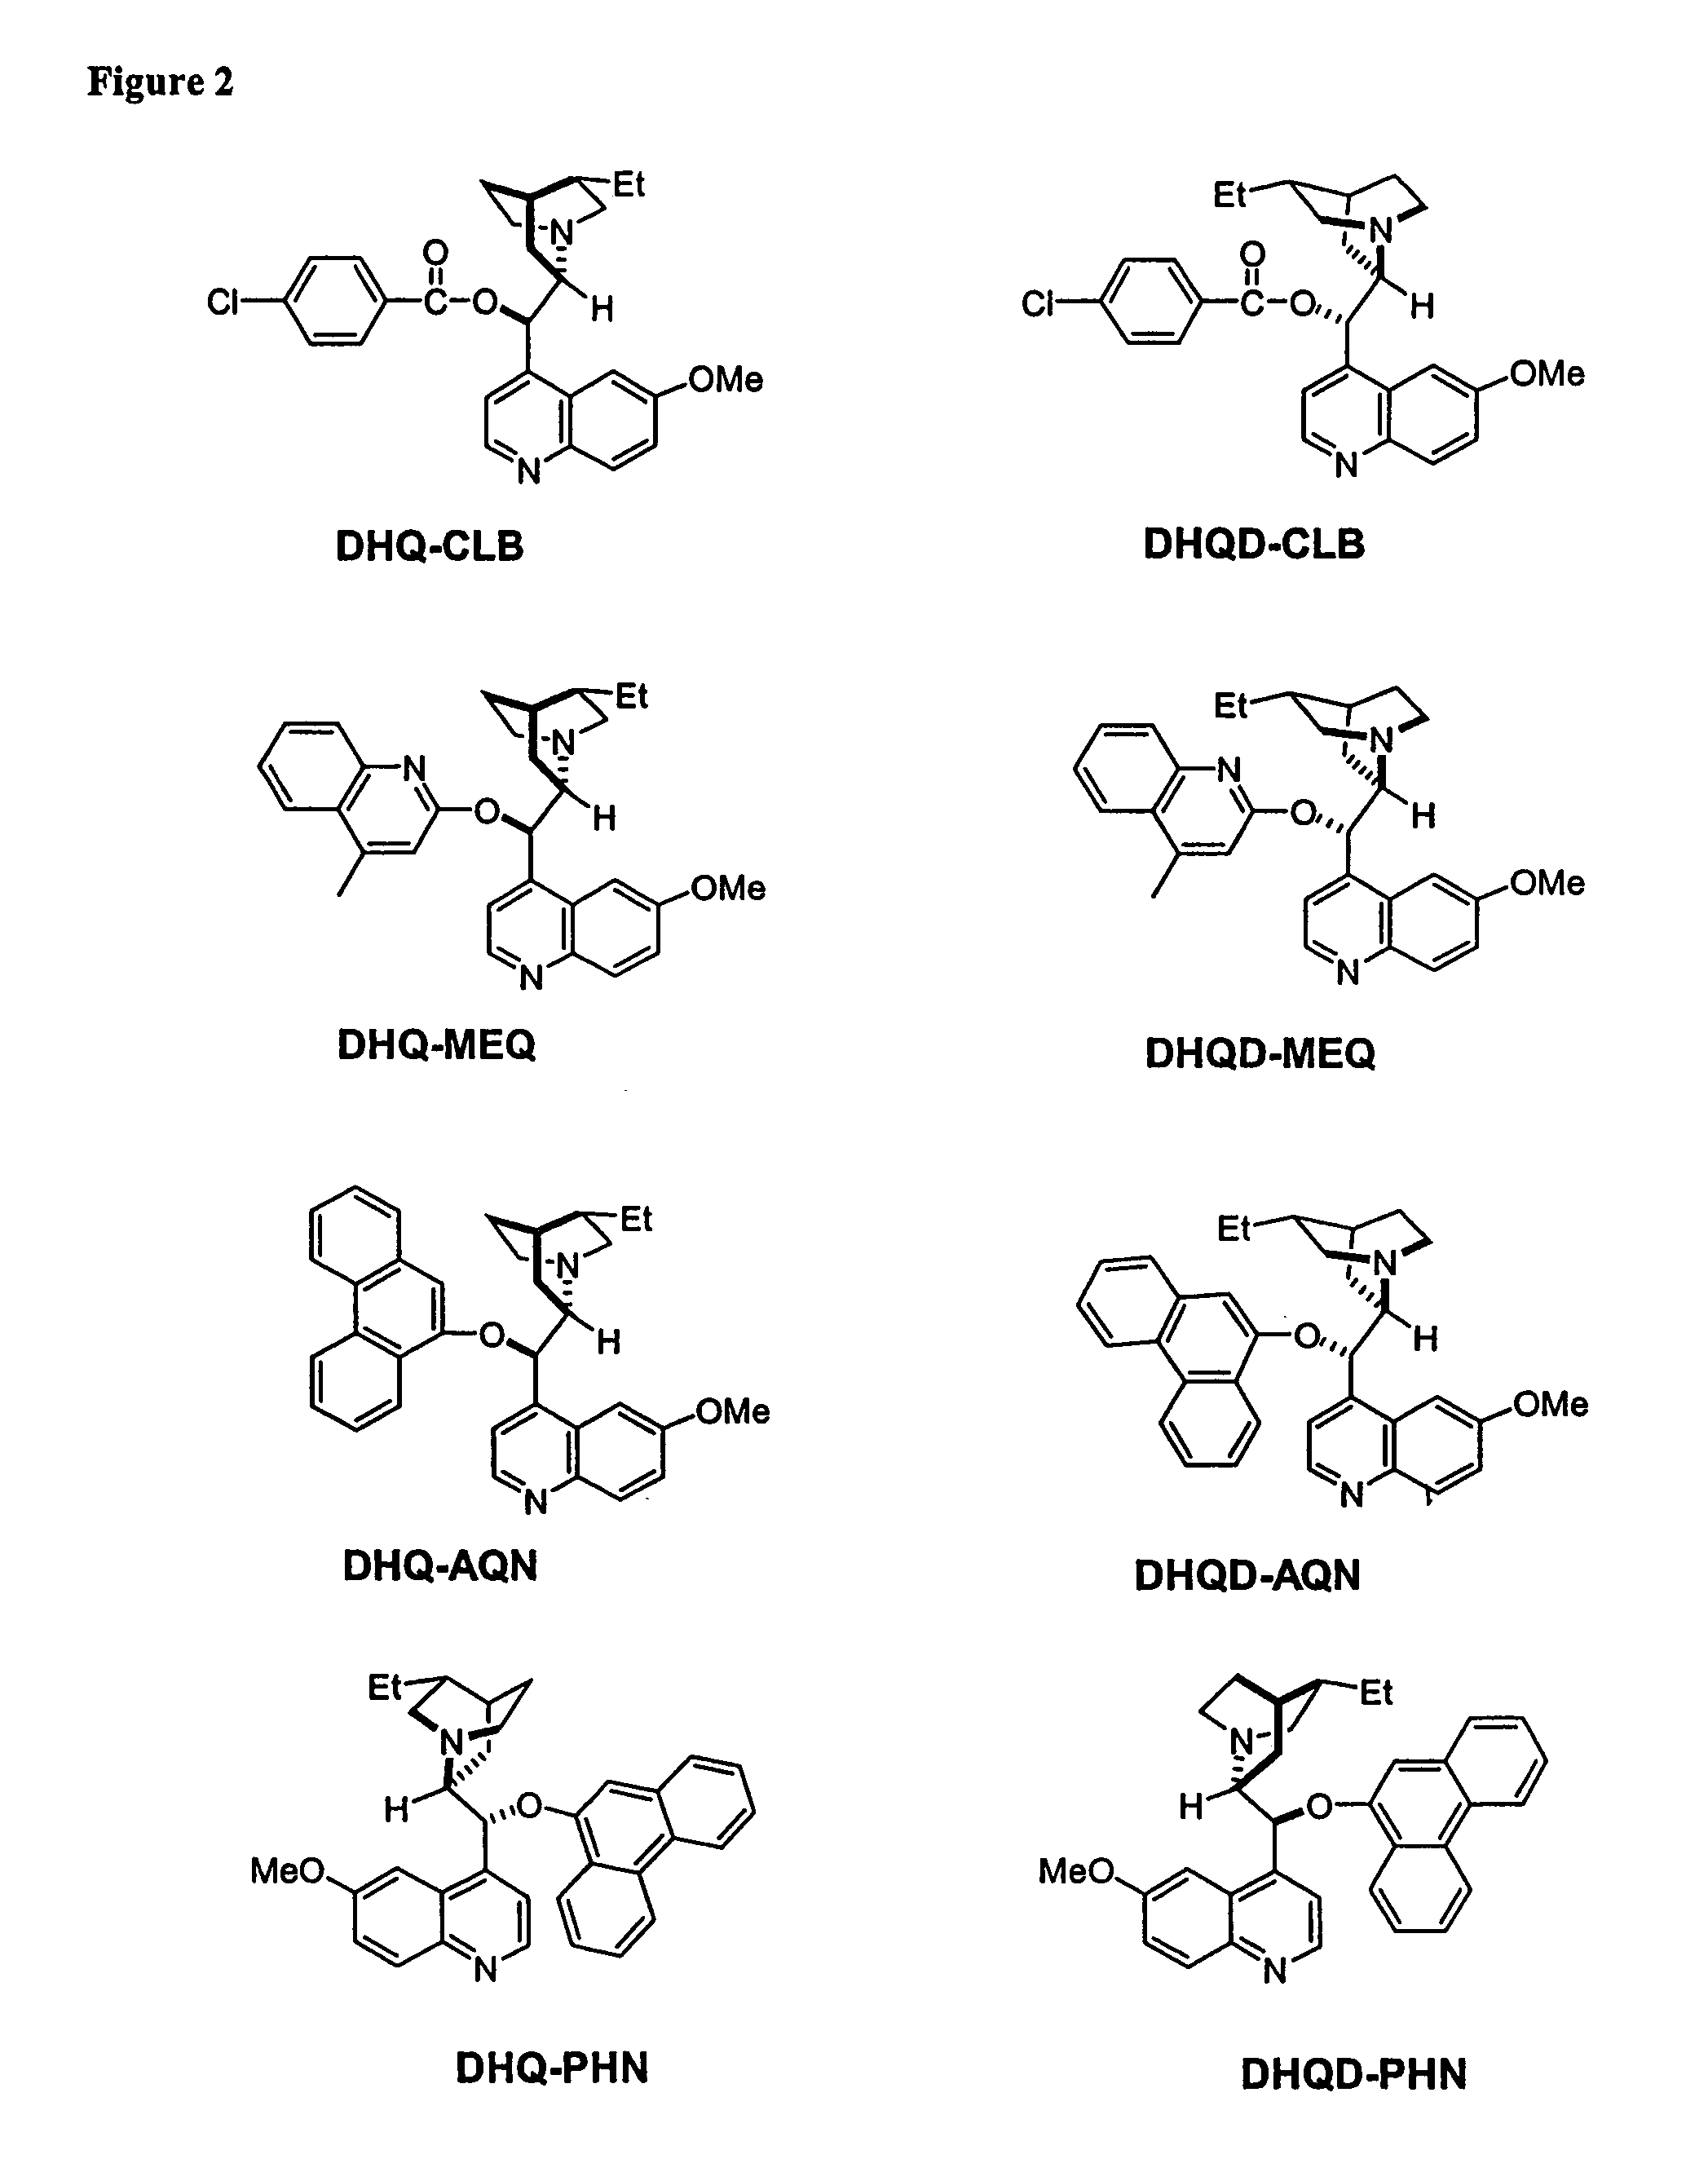 Kinetic resolutions of chiral 2- and 3-substituted carboxylic acids